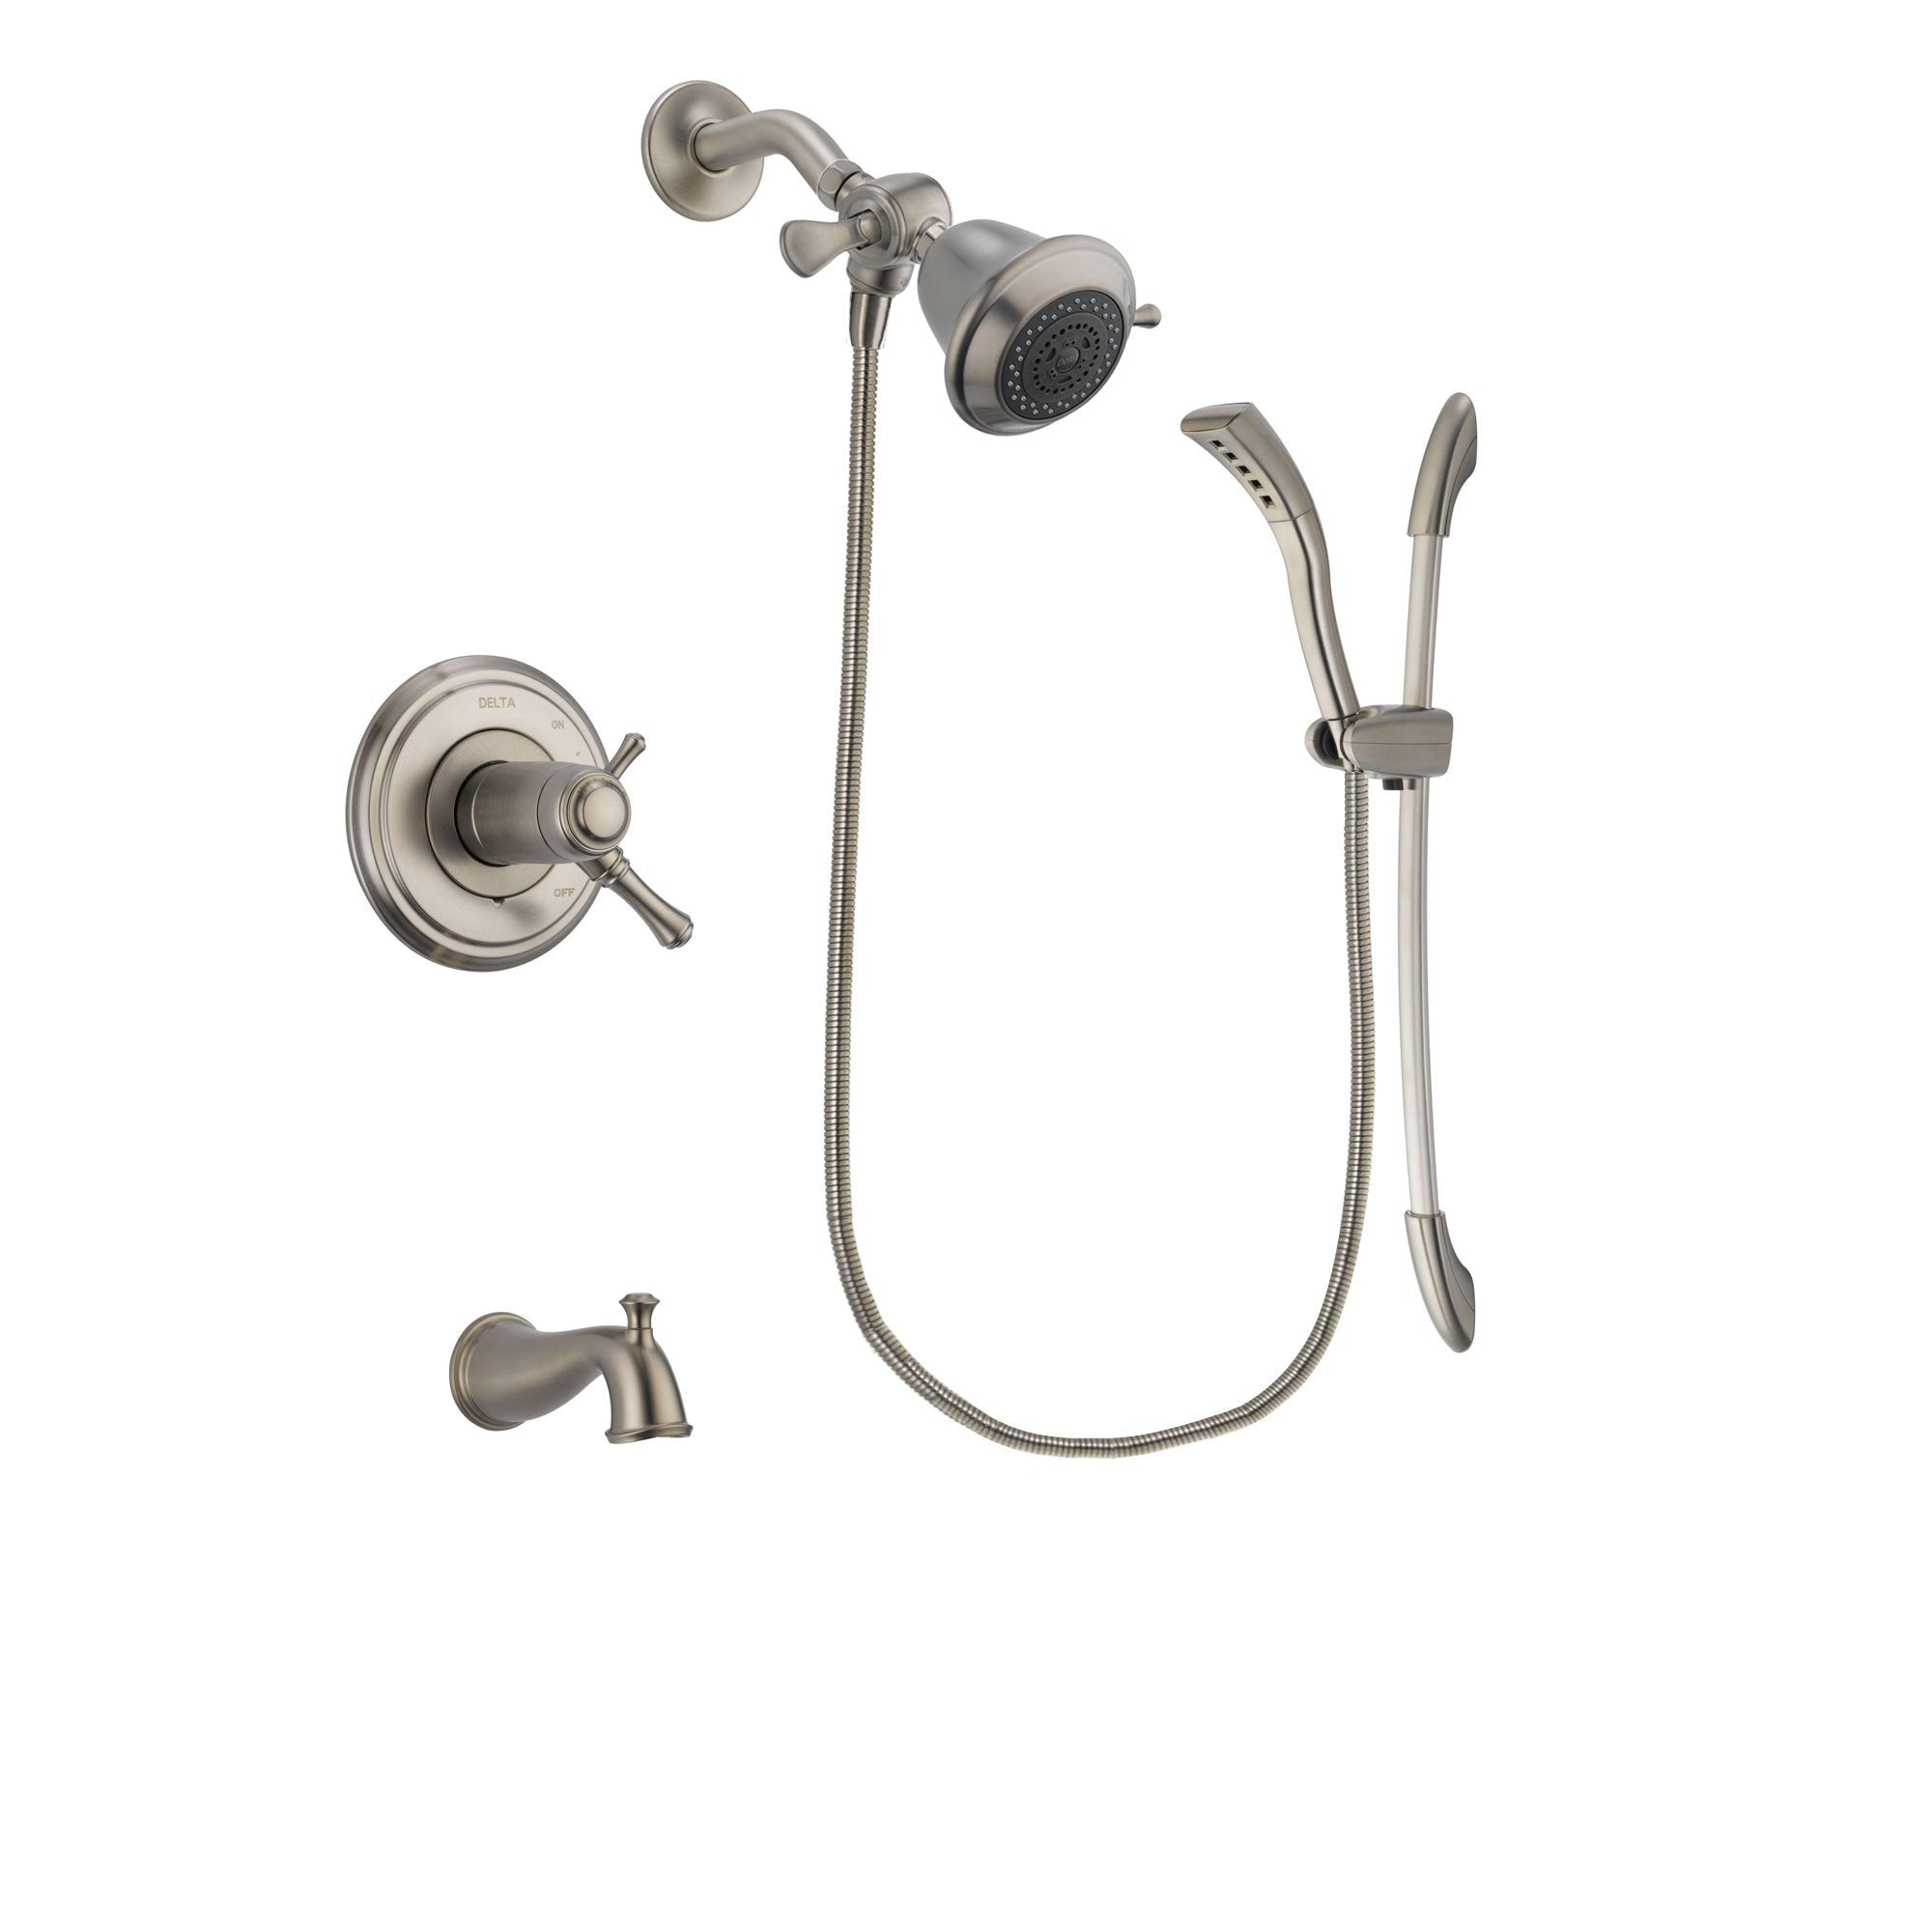 Delta Cassidy Stainless Steel Finish Thermostatic Tub and Shower Faucet System Package with Shower Head and Handshower with Slide Bar Includes Rough-in Valve and Tub Spout DSP1385V